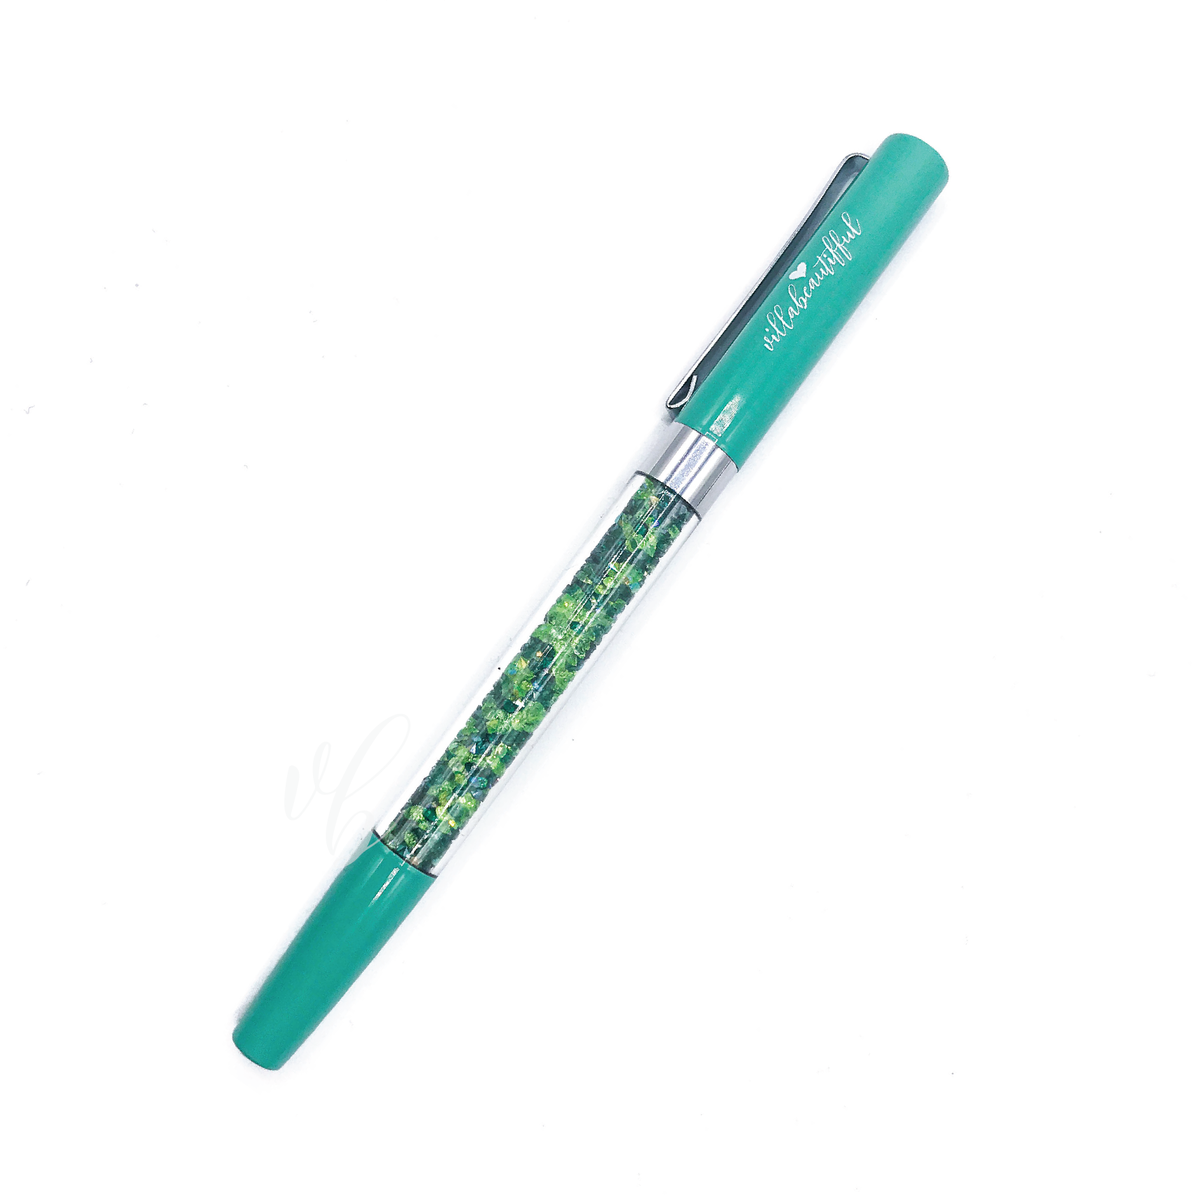 Foliage Imperfect Crystal VBPen | limited pen